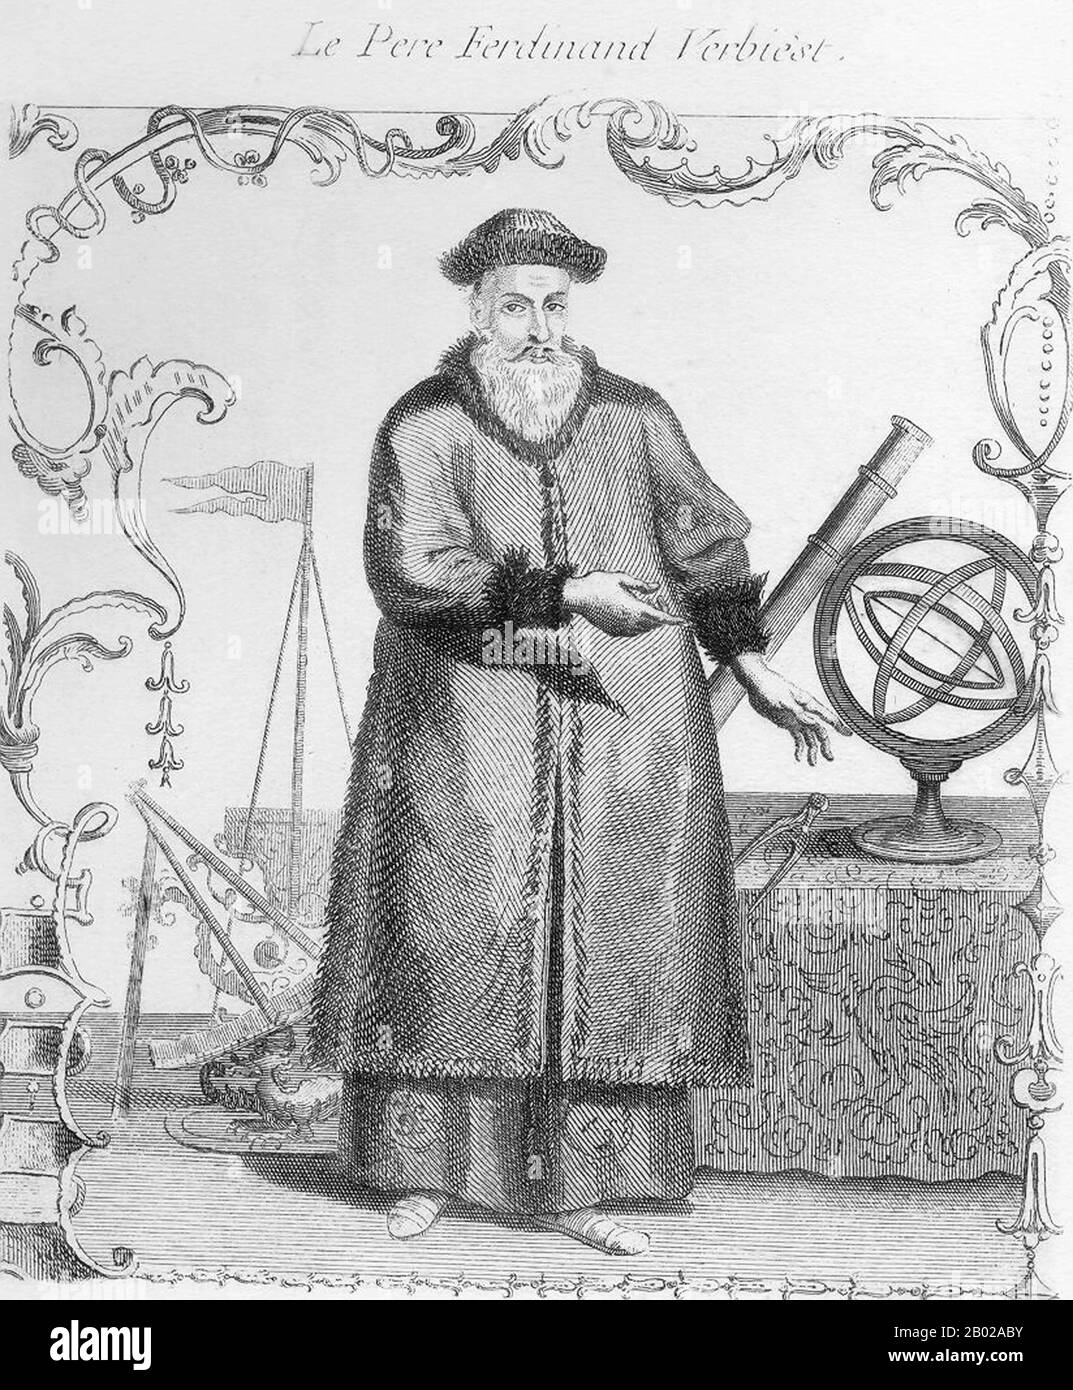 Father Ferdinand Verbiest (9 October 1623 – 28 January 1688) was a Flemish Jesuit missionary in China during the Qing dynasty. He was born in Pittem near Tielt in Flanders, later part of the modern state of Belgium. He was known as Nan Huairen (南懷仁) in Chinese.  He was an accomplished mathematician and astronomer and proved to the court of the Kangxi Emperor that European astronomy was more accurate than Chinese astronomy. He then corrected the Chinese calendar and was later asked to rebuild and re-equip the Beijing Ancient Observatory, being given the role of Head of the Mathematical Board an Stock Photo